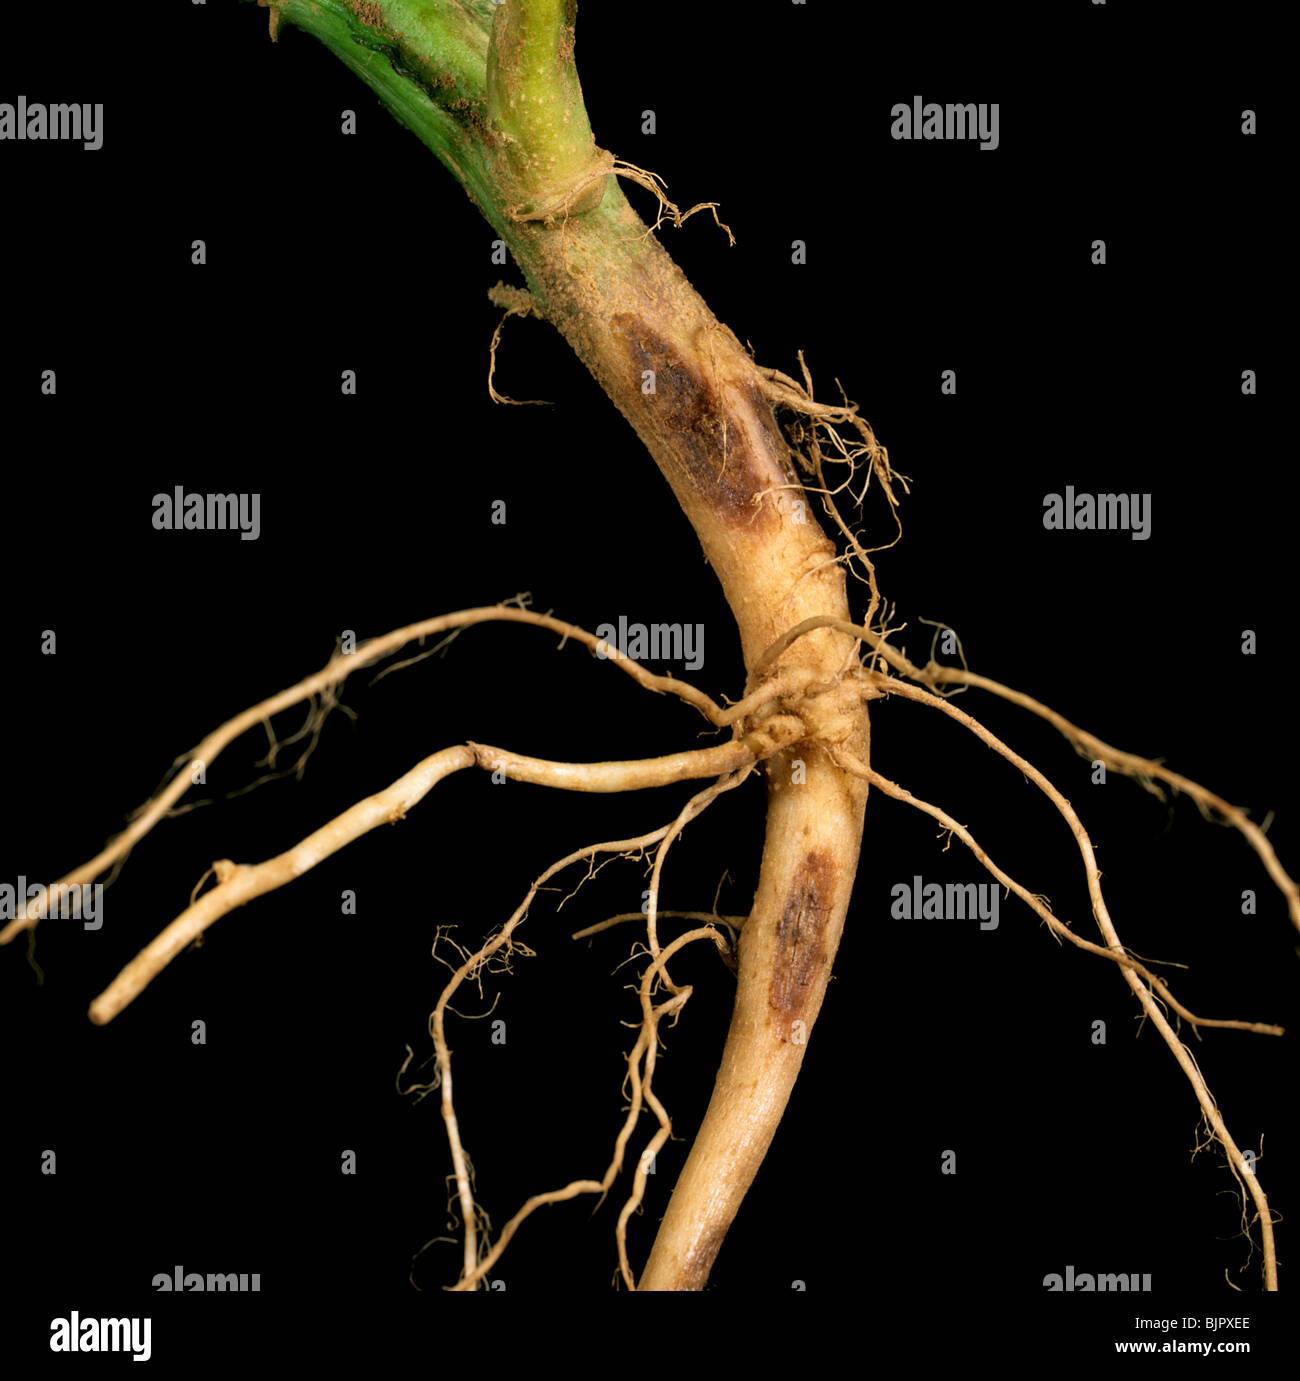 Stem canker (Rhizoctonia solani) lesions on the roots and lower stem of a potato plant Stock Photo